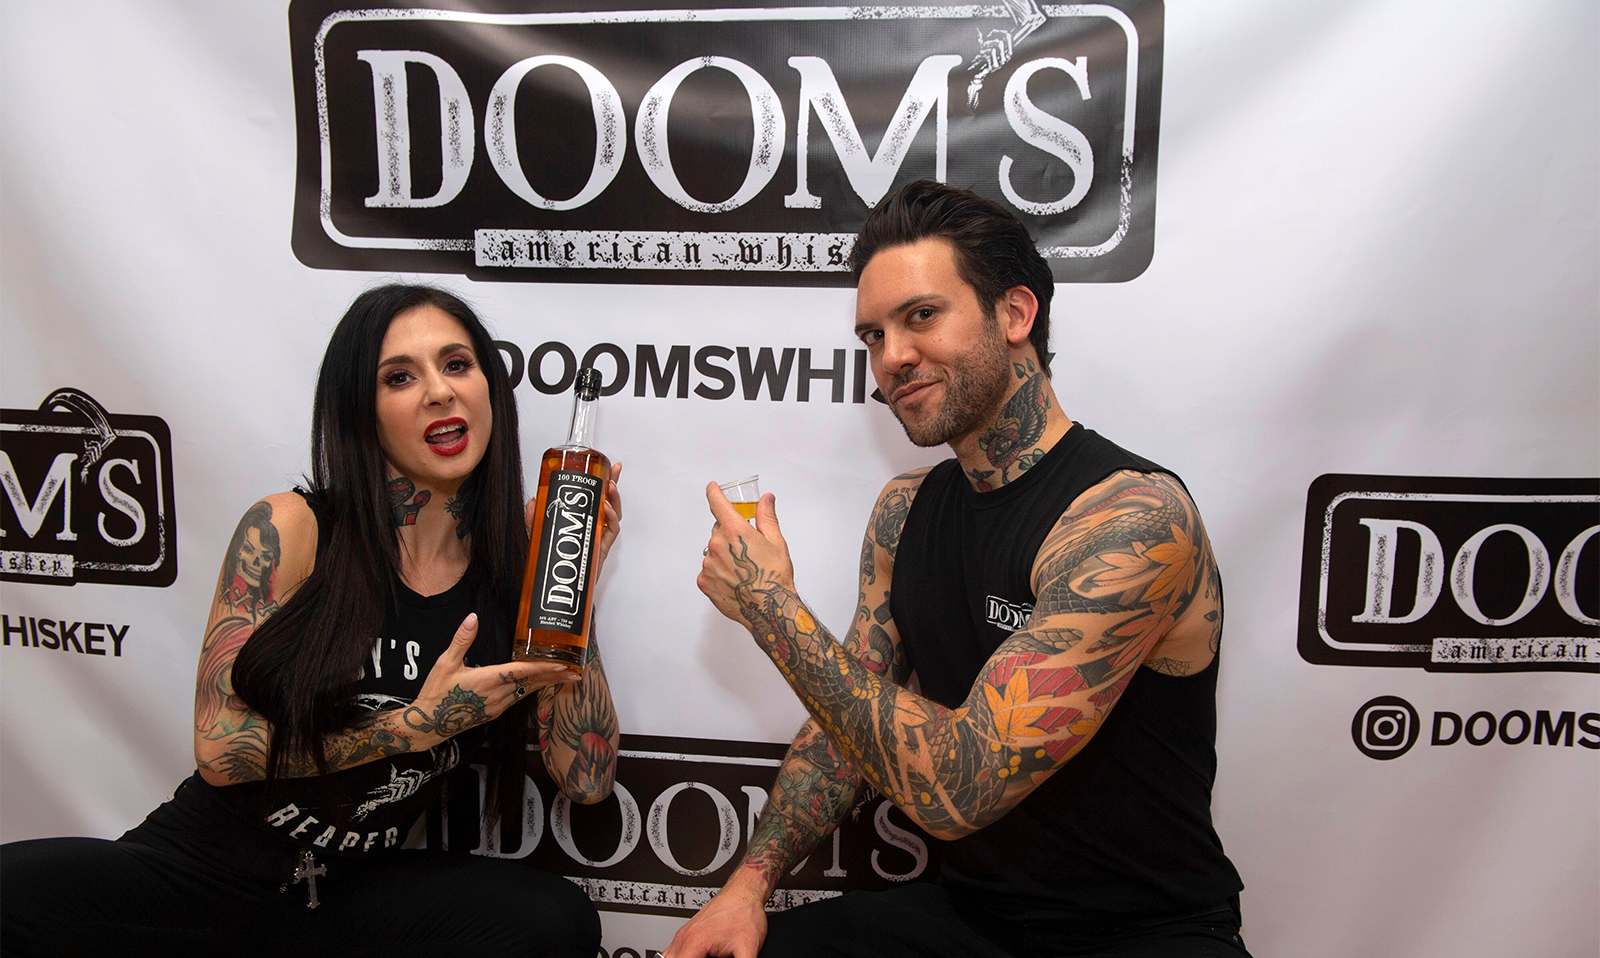 Doom's Whiskey Sells Out at Tasting Event